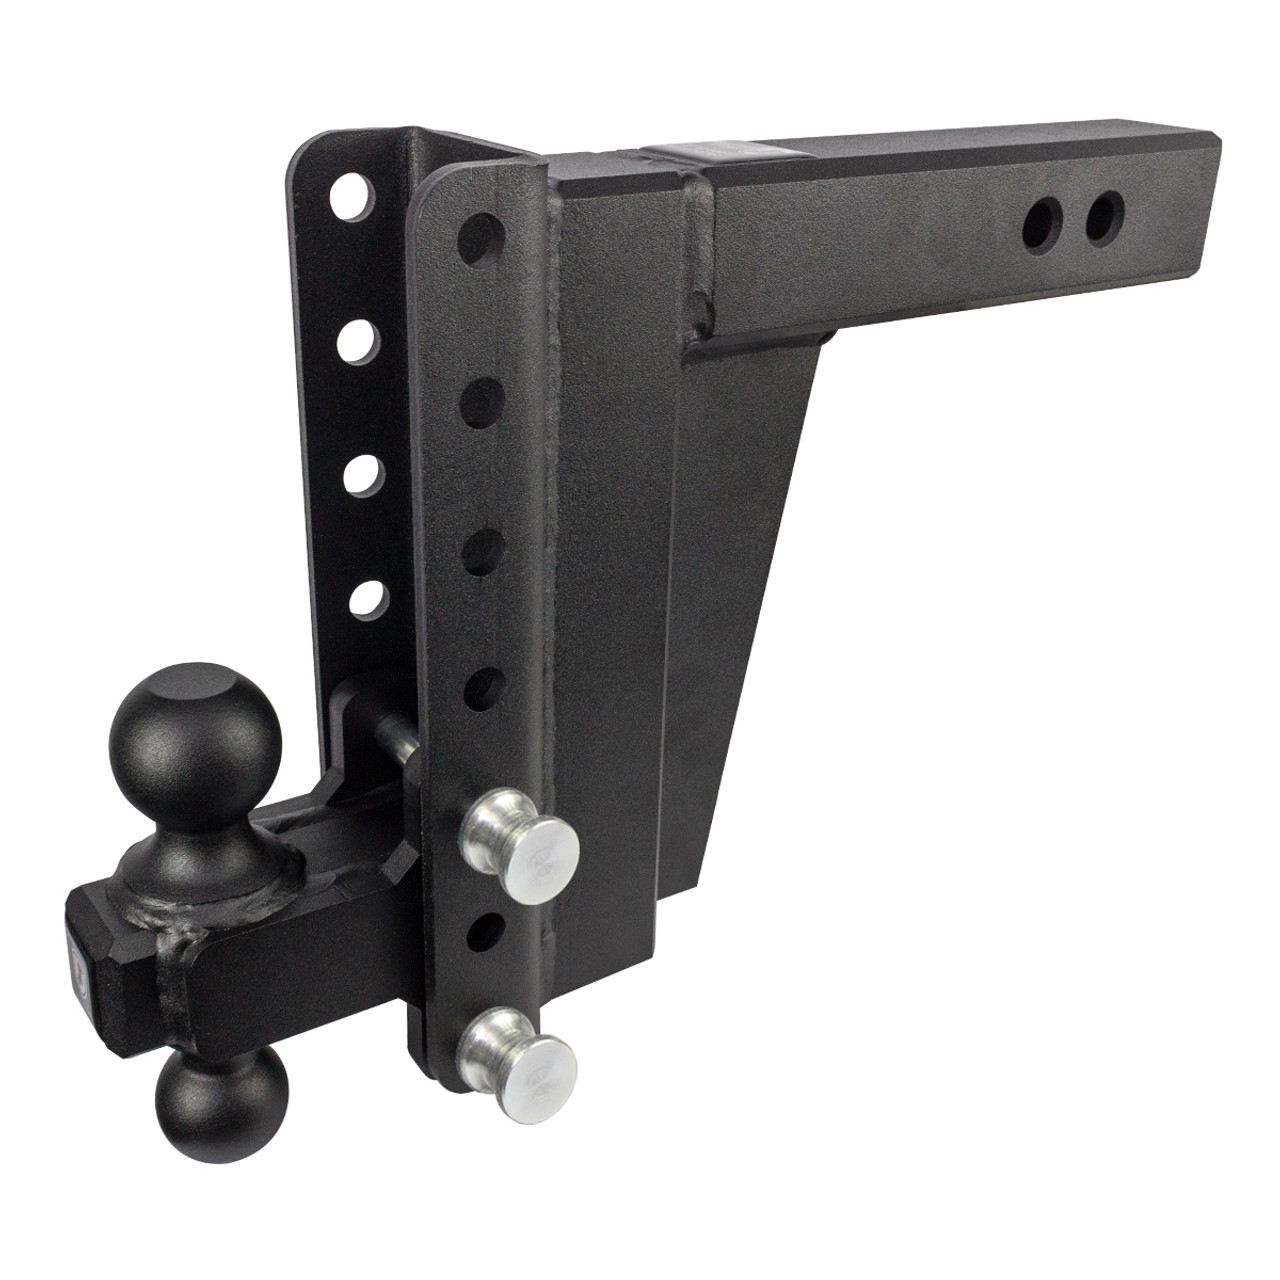 2.5” Extreme Duty 8” Drop/Rise Trailer Hitch